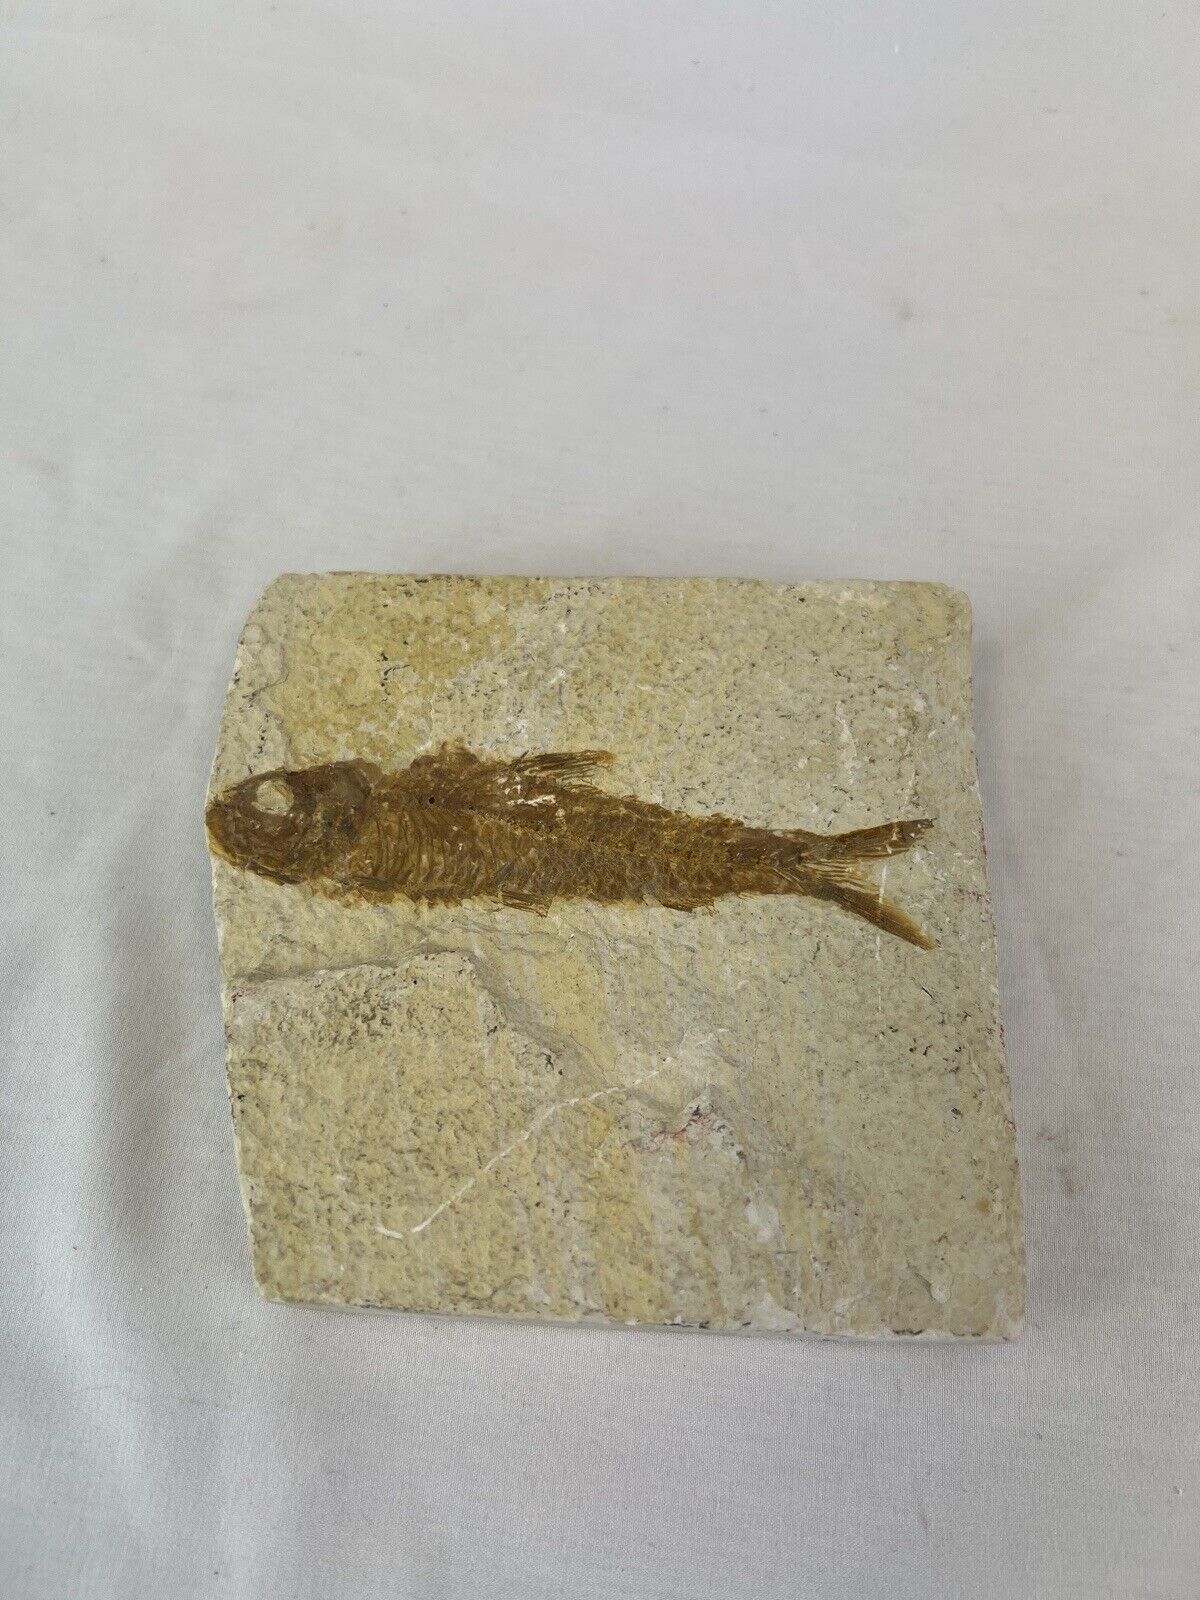 Fossil Fish large - Incredible detail and carefully prepared. 12 inches long